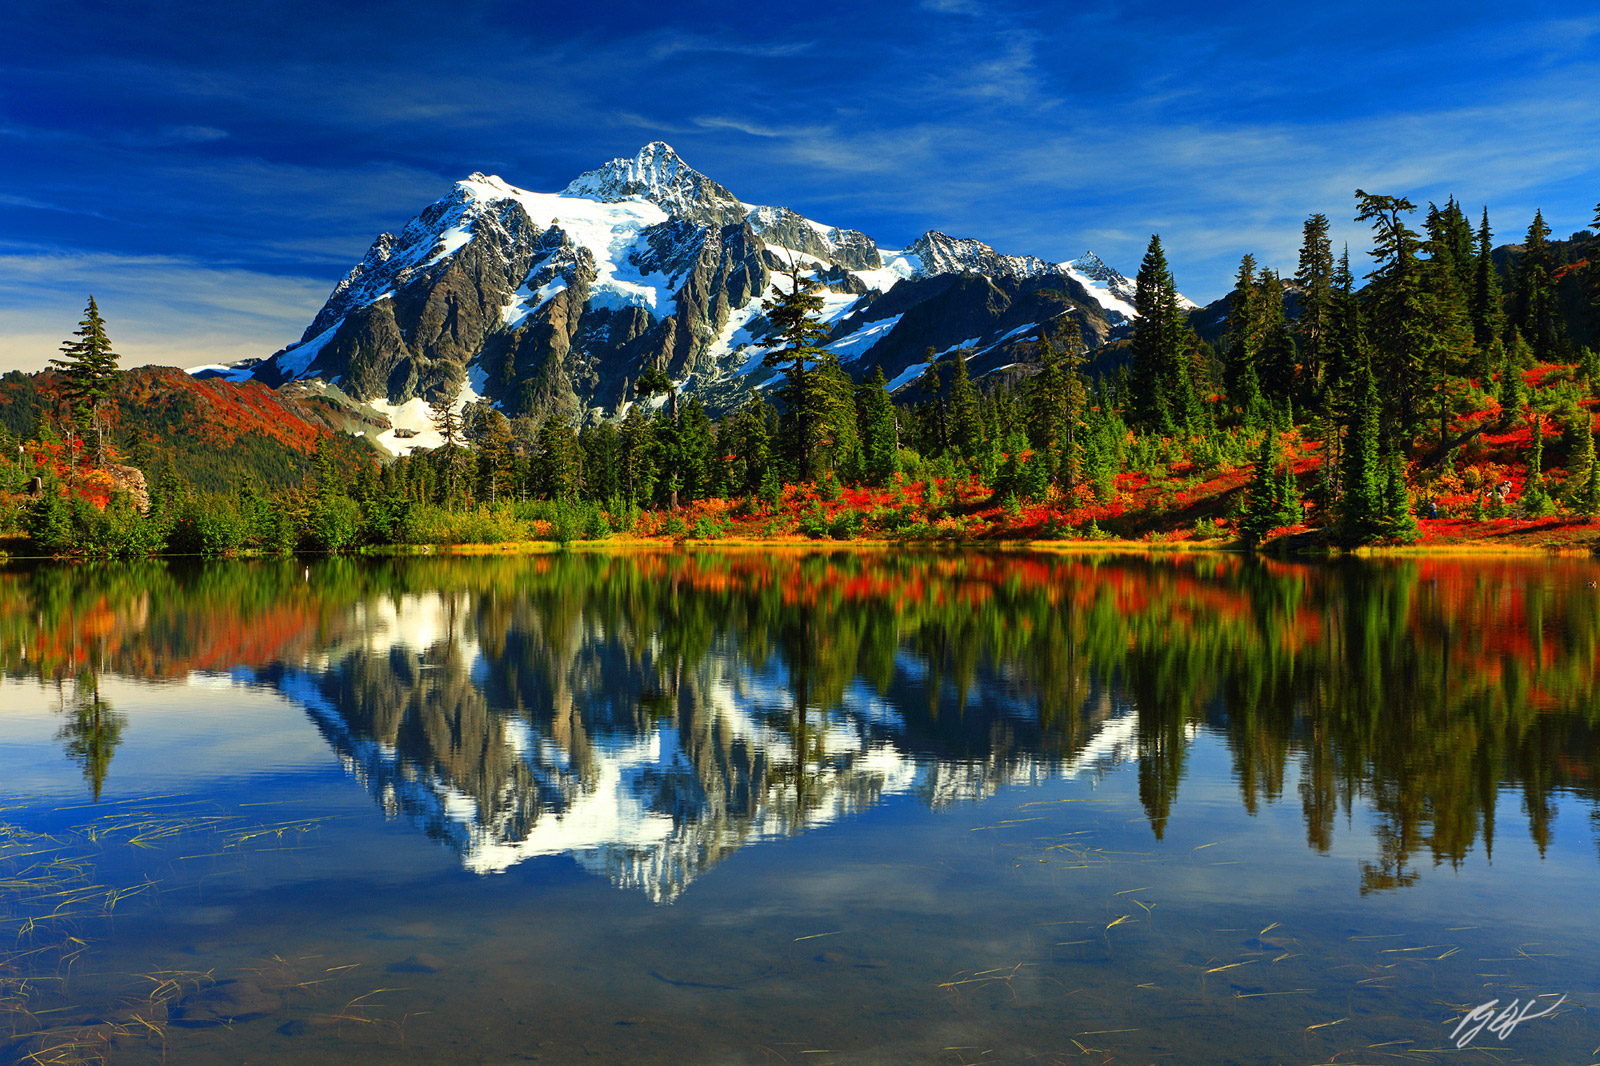 Mt Shuksan Reflected in Picture Lake in Heather Meadows in the Mt Baker National Recreation Area in Washington